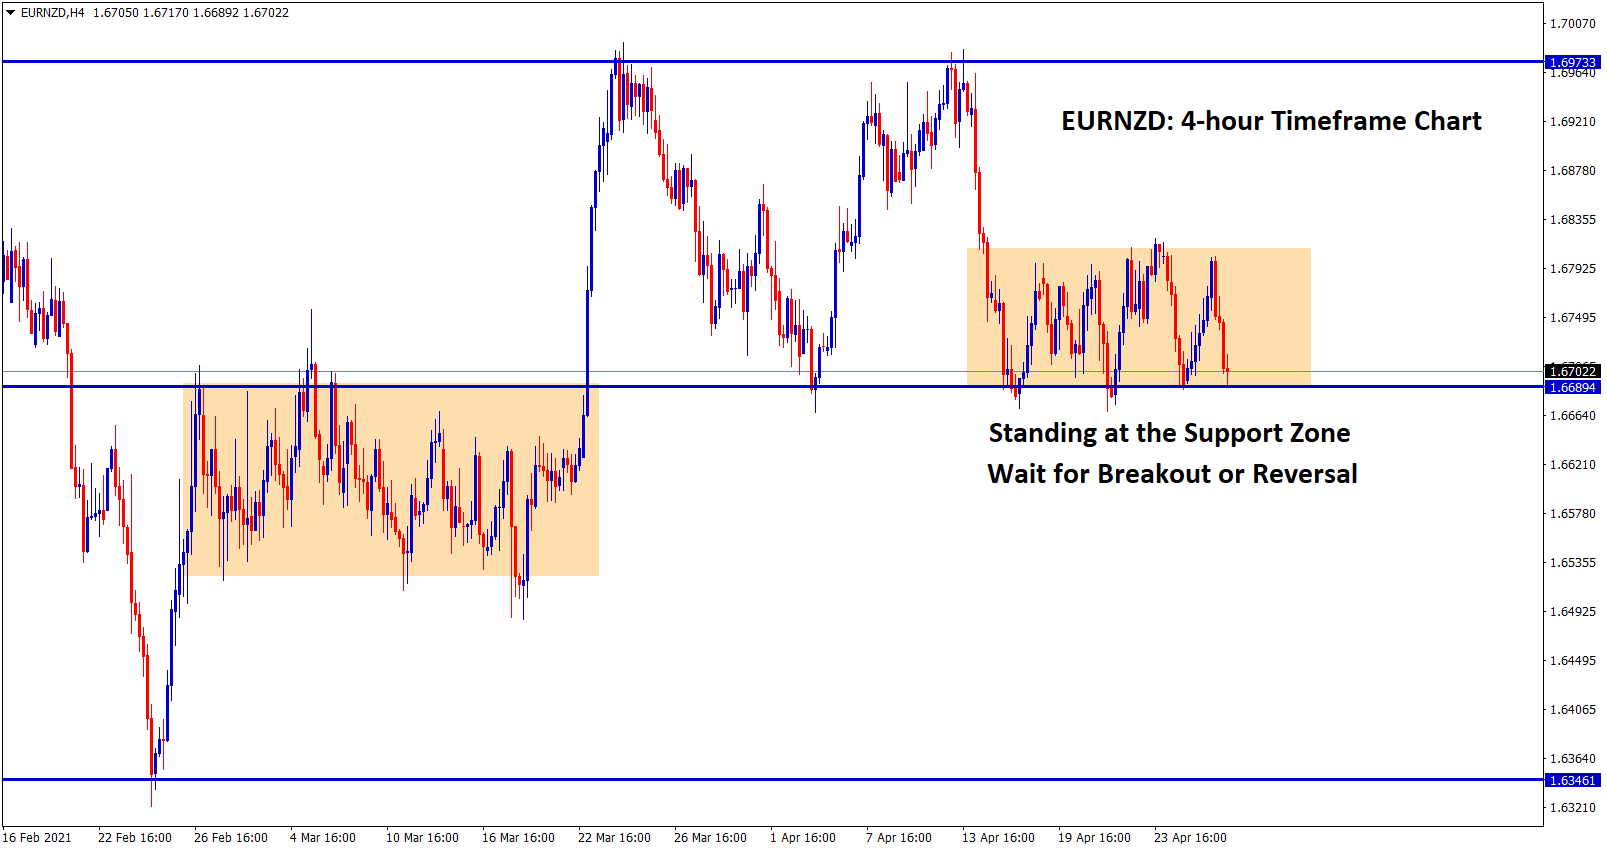 EURNZD is standing at the support zone